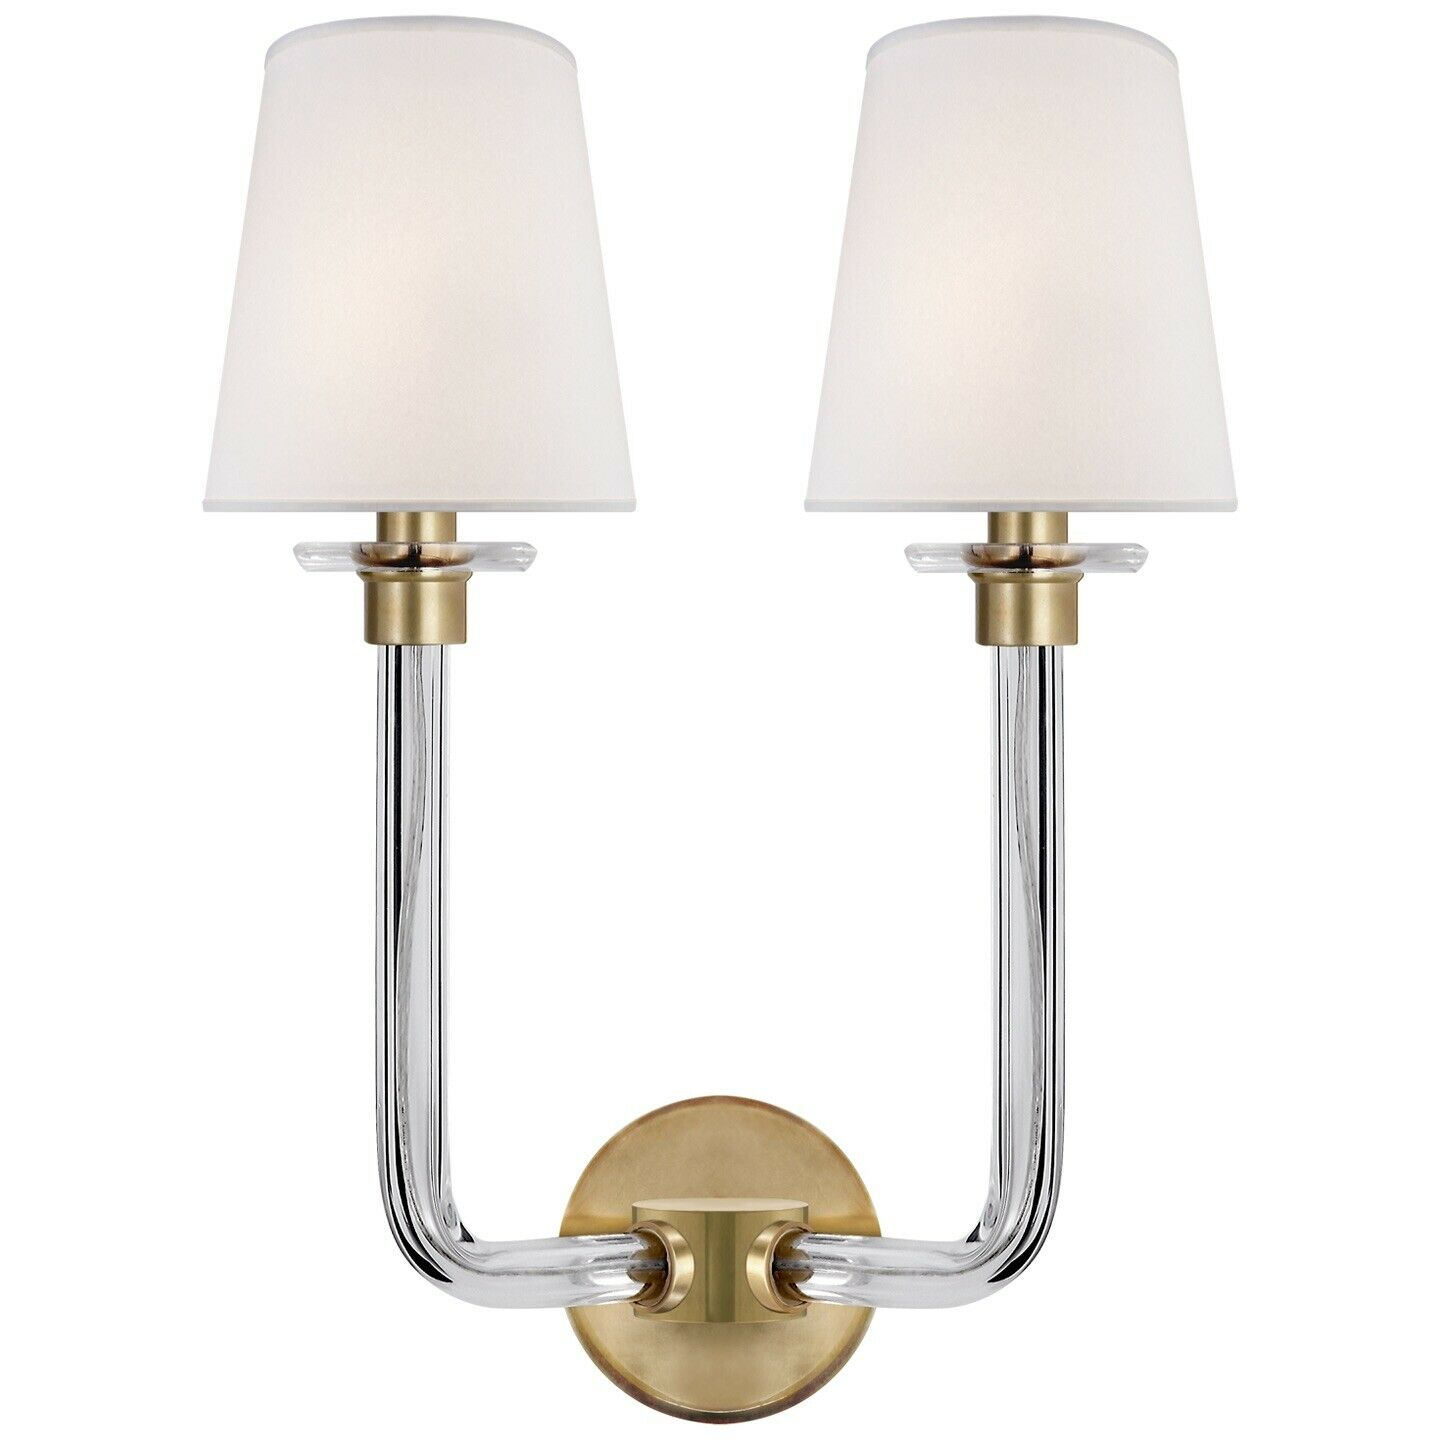 Visual Comfort Parker Double Sconce In Natural Brass Ralph Lauren Rl2146cg Eu in sizing 1440 X 1440